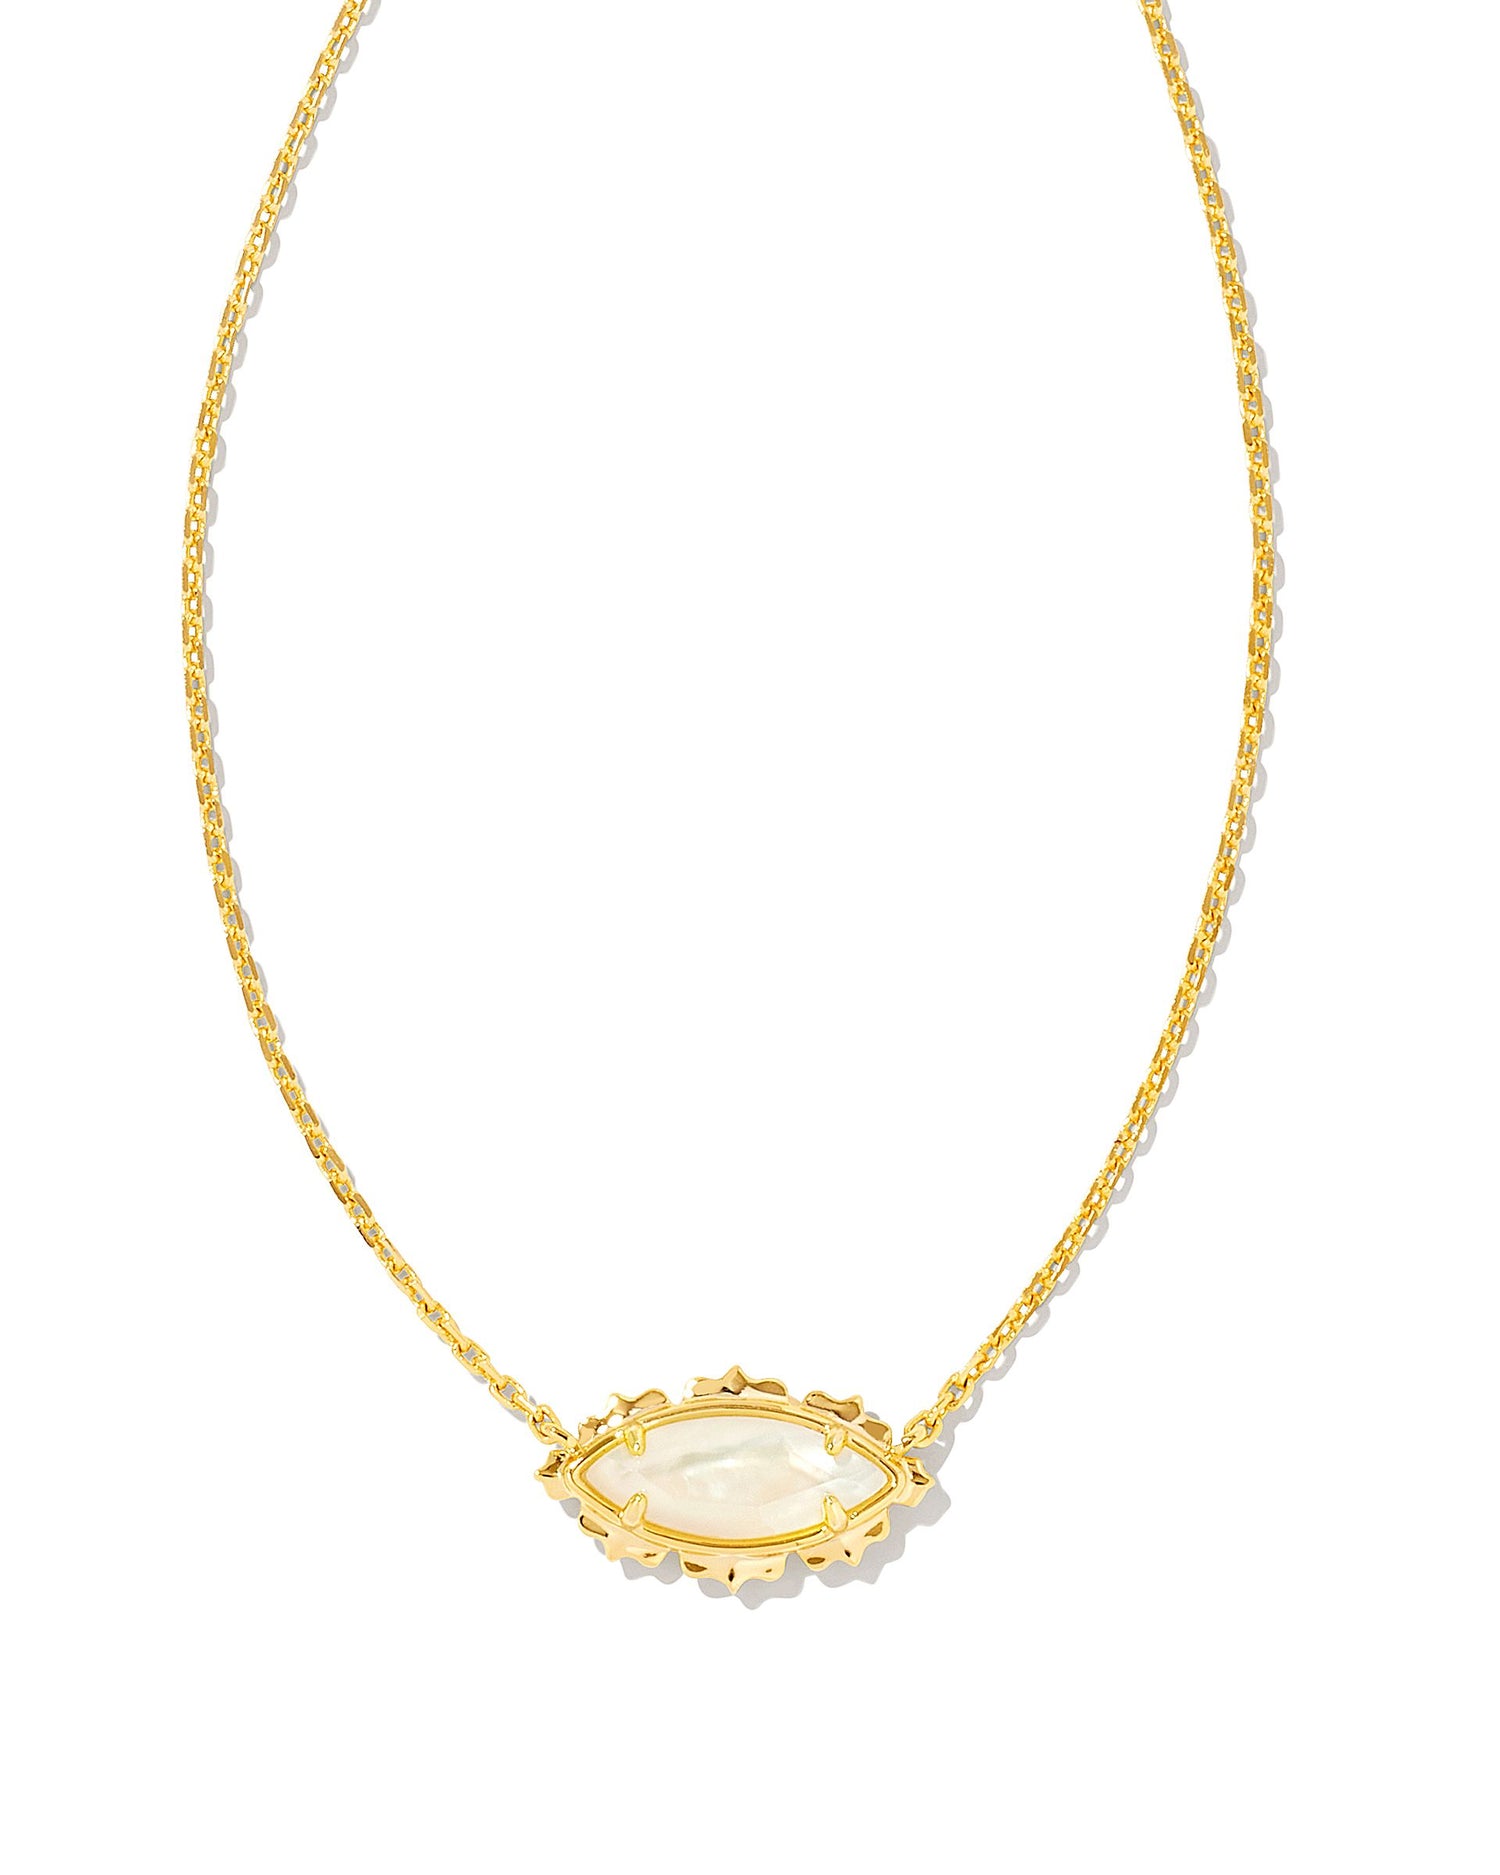 Timeless with a touch of sparkle, the Genevieve Gold Short Pendant Necklace is sure to be your newest everyday essential. Perfect as a standalone piece or an elegant addition to a layered look, this marquise-shaped pendant adds a bit of shine to any occasion.  Dimensions- 16' CHAIN WITH 3' EXTENDER, 0.34'Lx0.6"W PENDENT Metal- 14K Gold plated over brass Closure- Lobster clasp w/ single adjustable slider bead Mother of pearl color